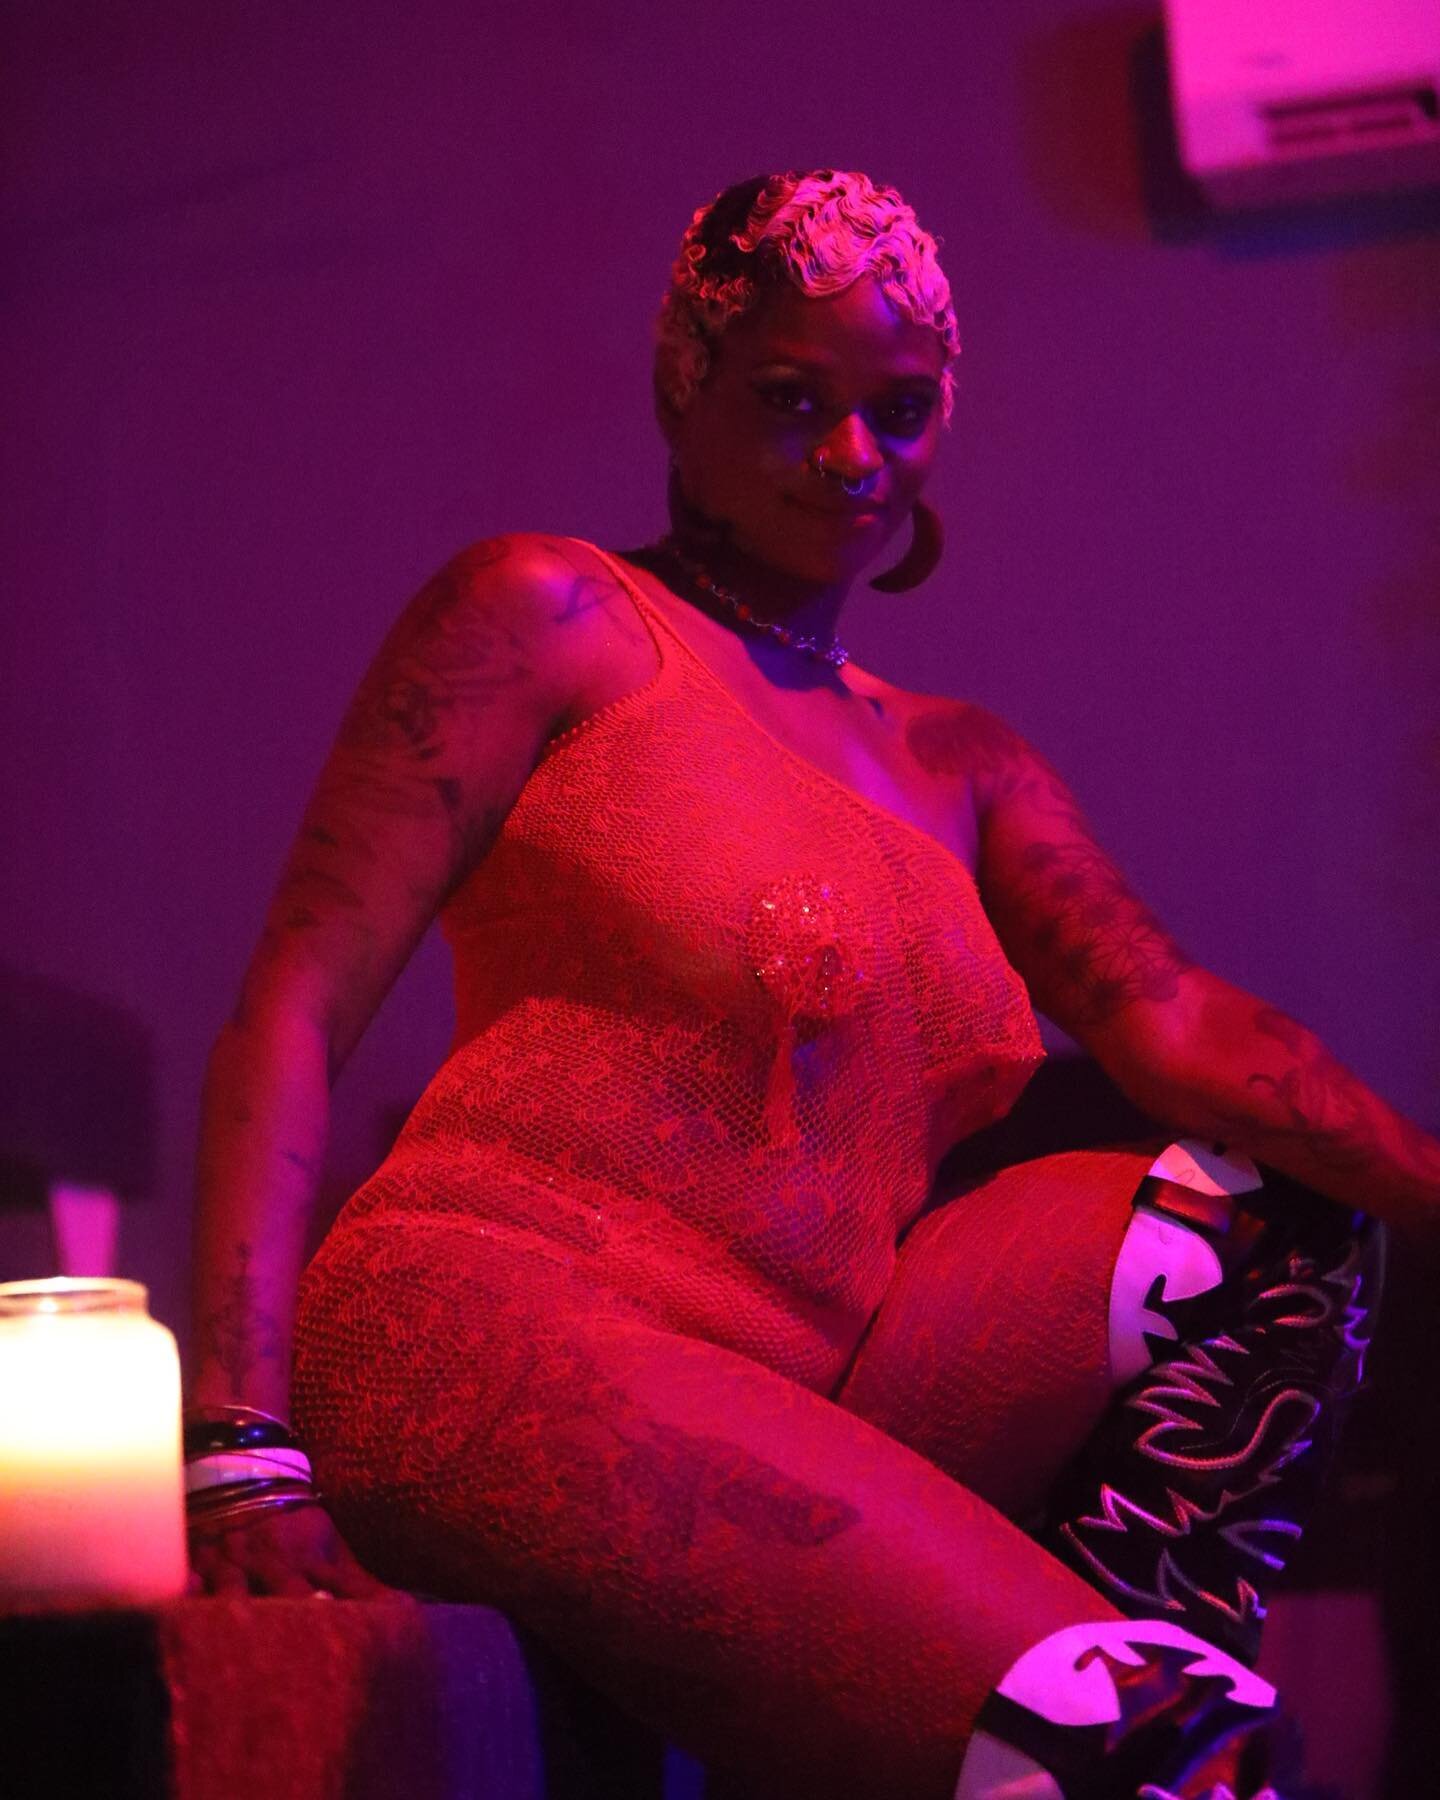 Moon Lovers🌕💋
Last @moaninatmidnightwithmoon was sexier than a muthafucka🙌🏿🙌🏿 everyone in red, igniting that root chakra, we set intentions, we had an awesome time 🌹 I hope to see you again.
With Pleasure,
I.&Oslash;. Moon

Photos @media_seaux